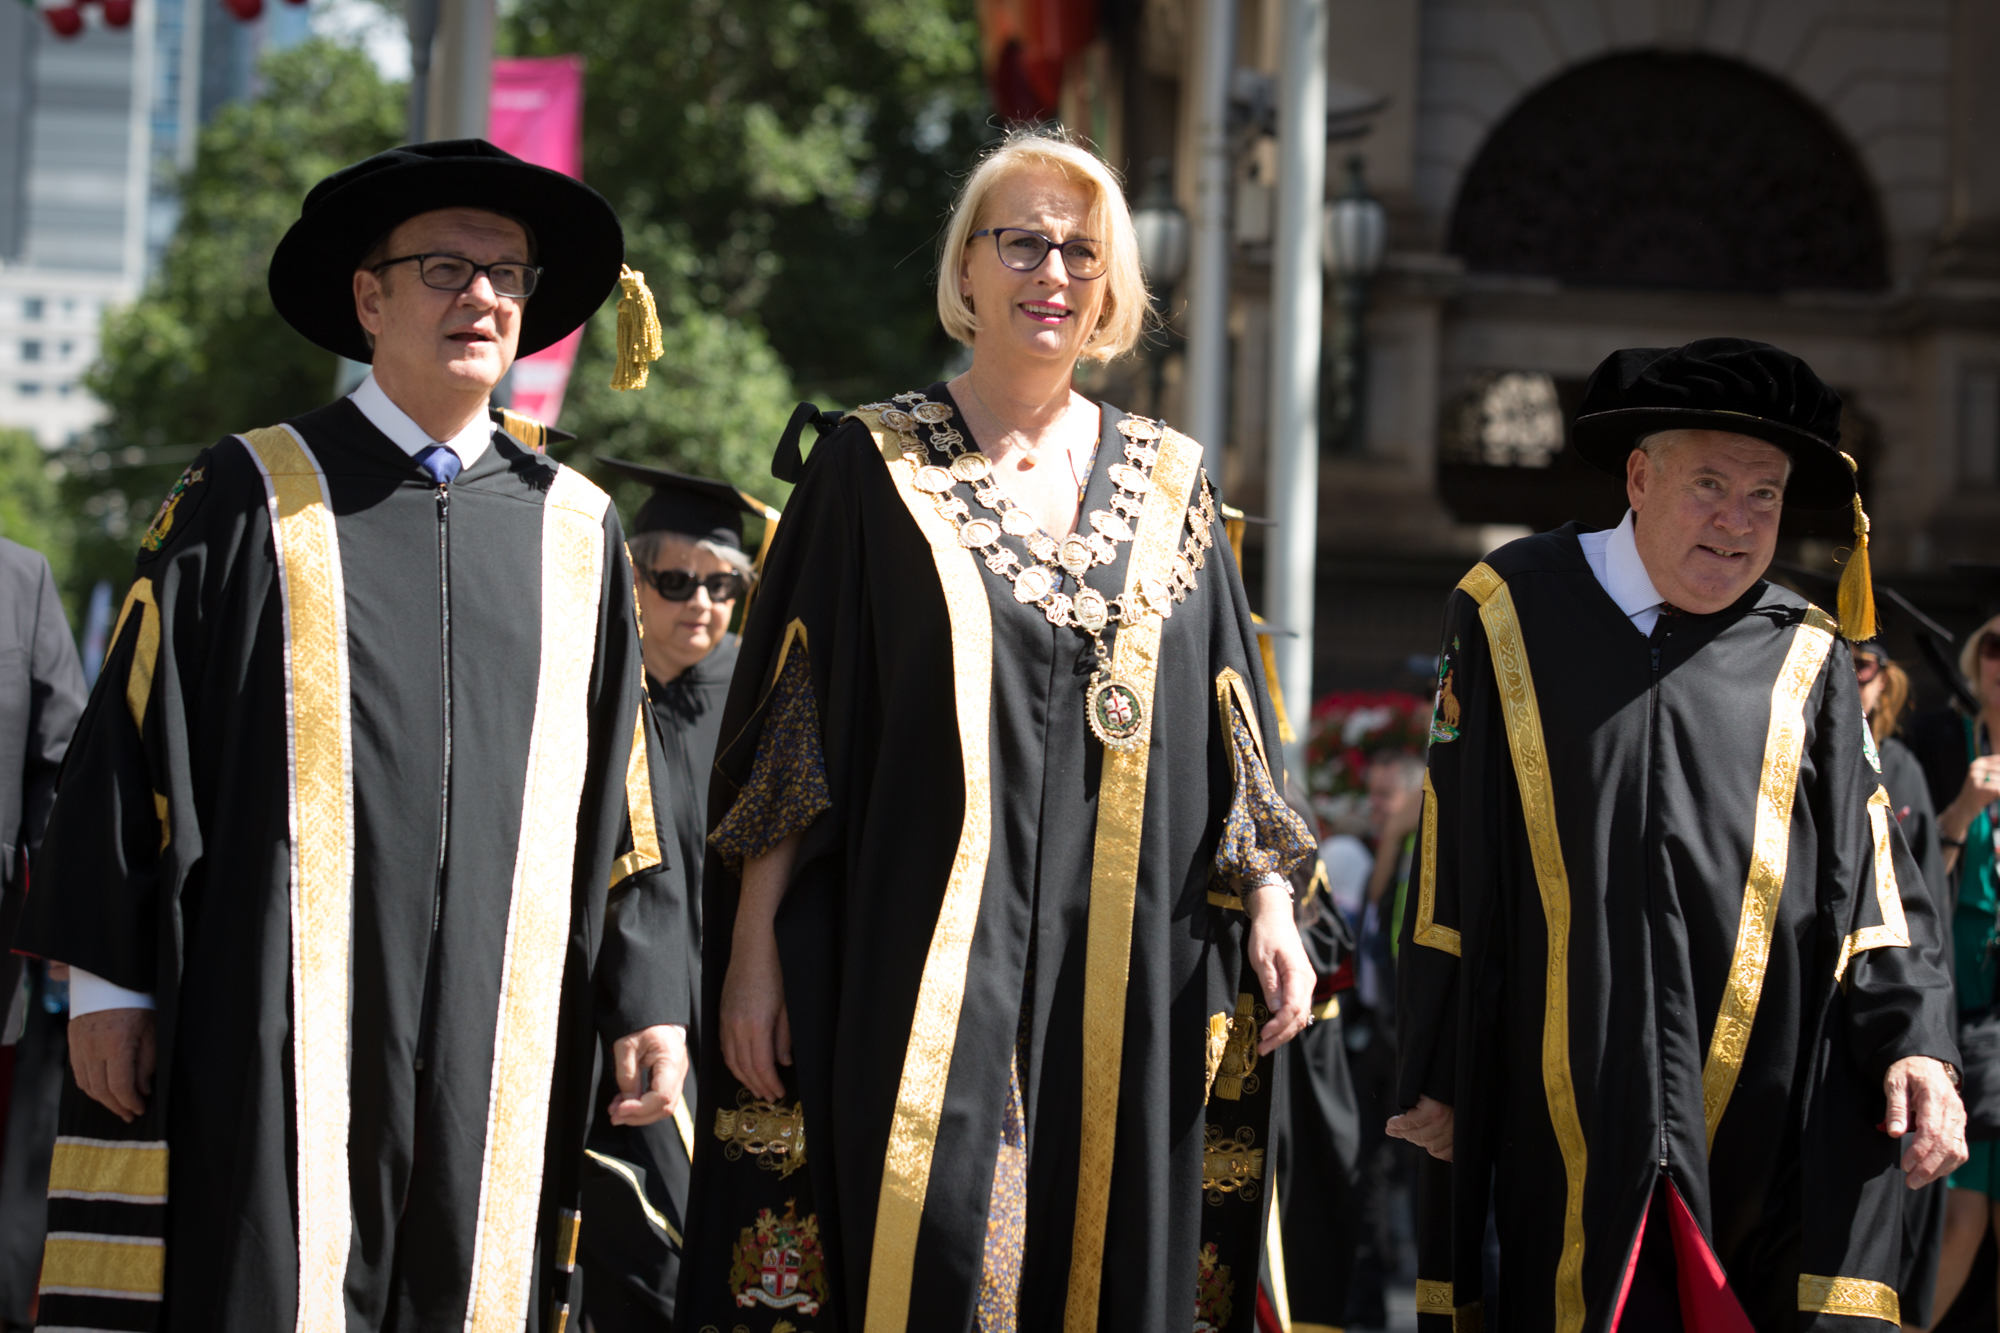 L-R: RMIT Chancellor Ziggy Switkowski AO, City of Melbourne Lord Mayor Sally Capp and RMIT Vice-Chancellor and President Martin Bean CBE walk together following the iconic RMIT graduand parade